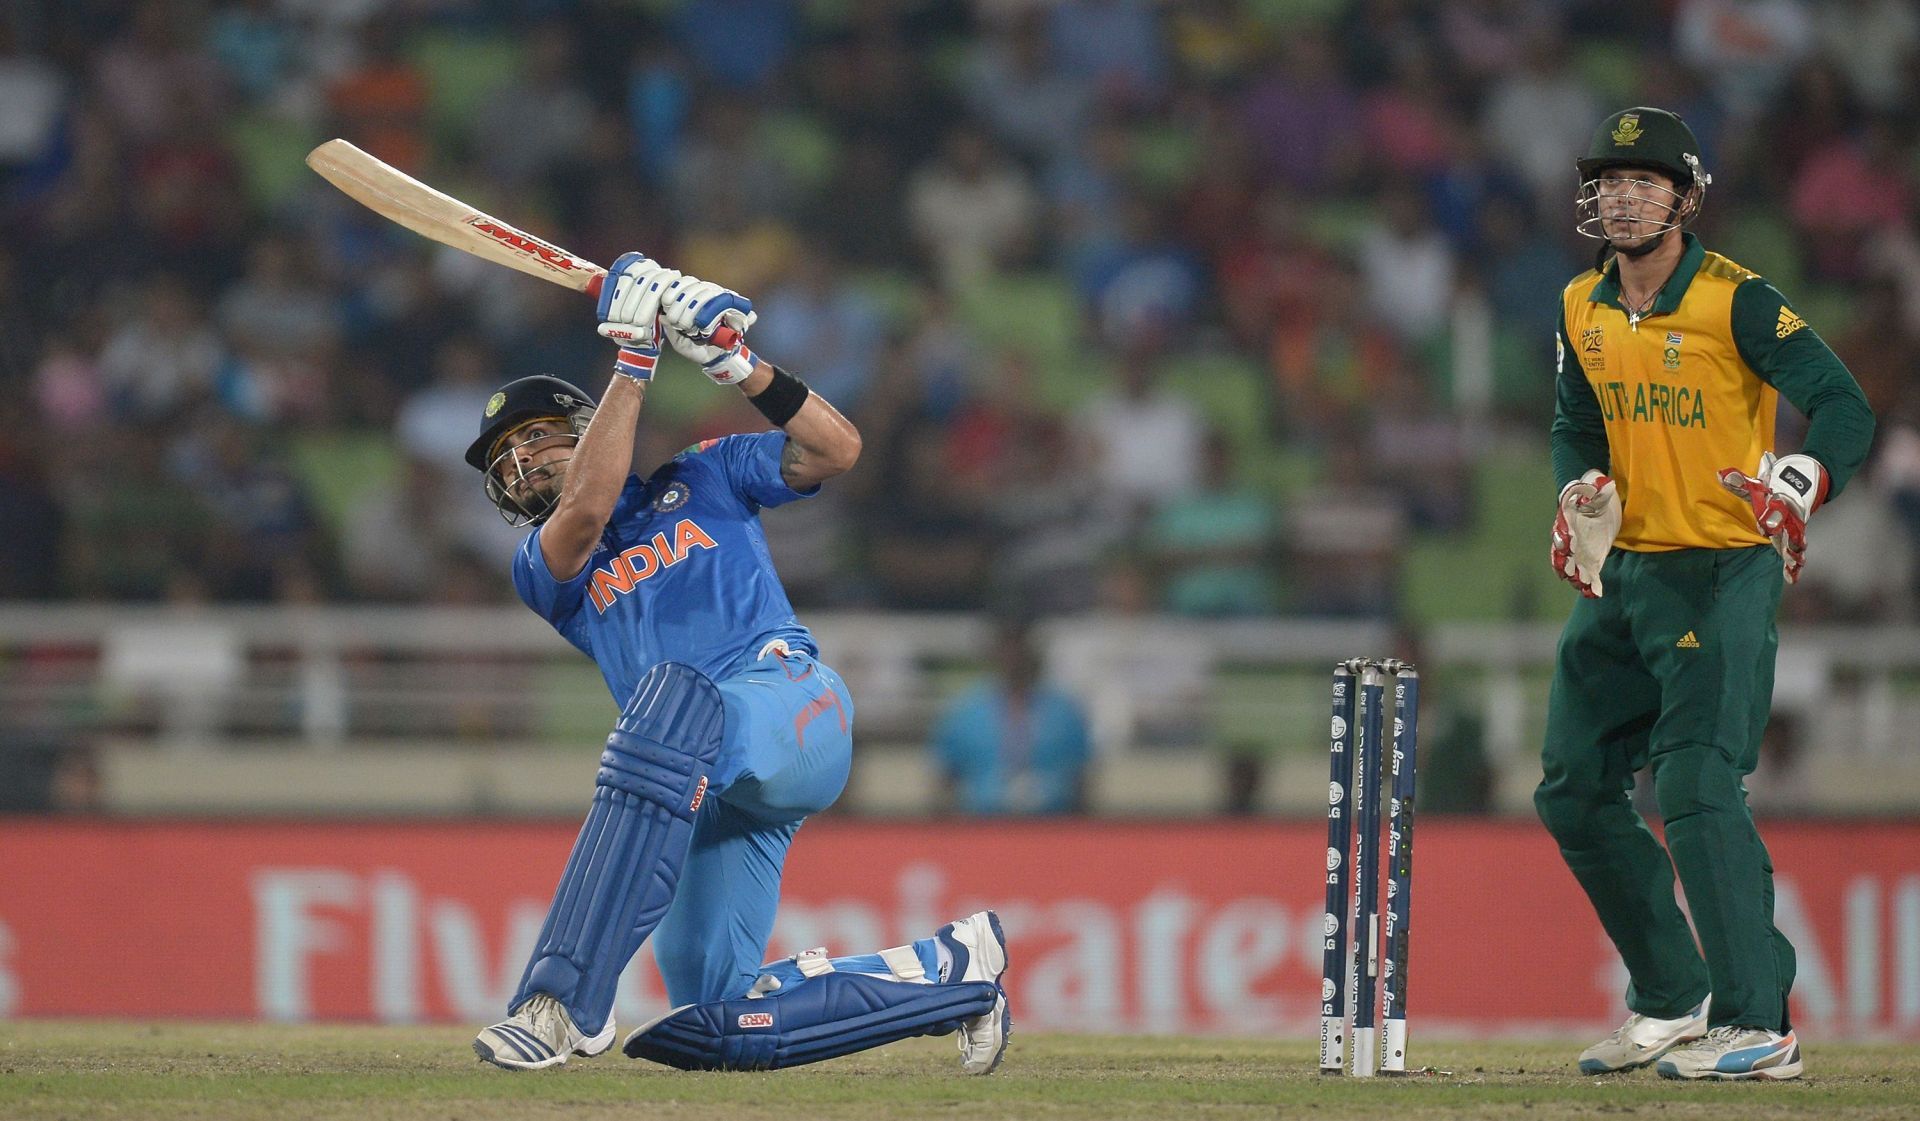 Virat Kohli during the 2014 T20 World Cup semi-final against South Africa. Pic: Getty Images